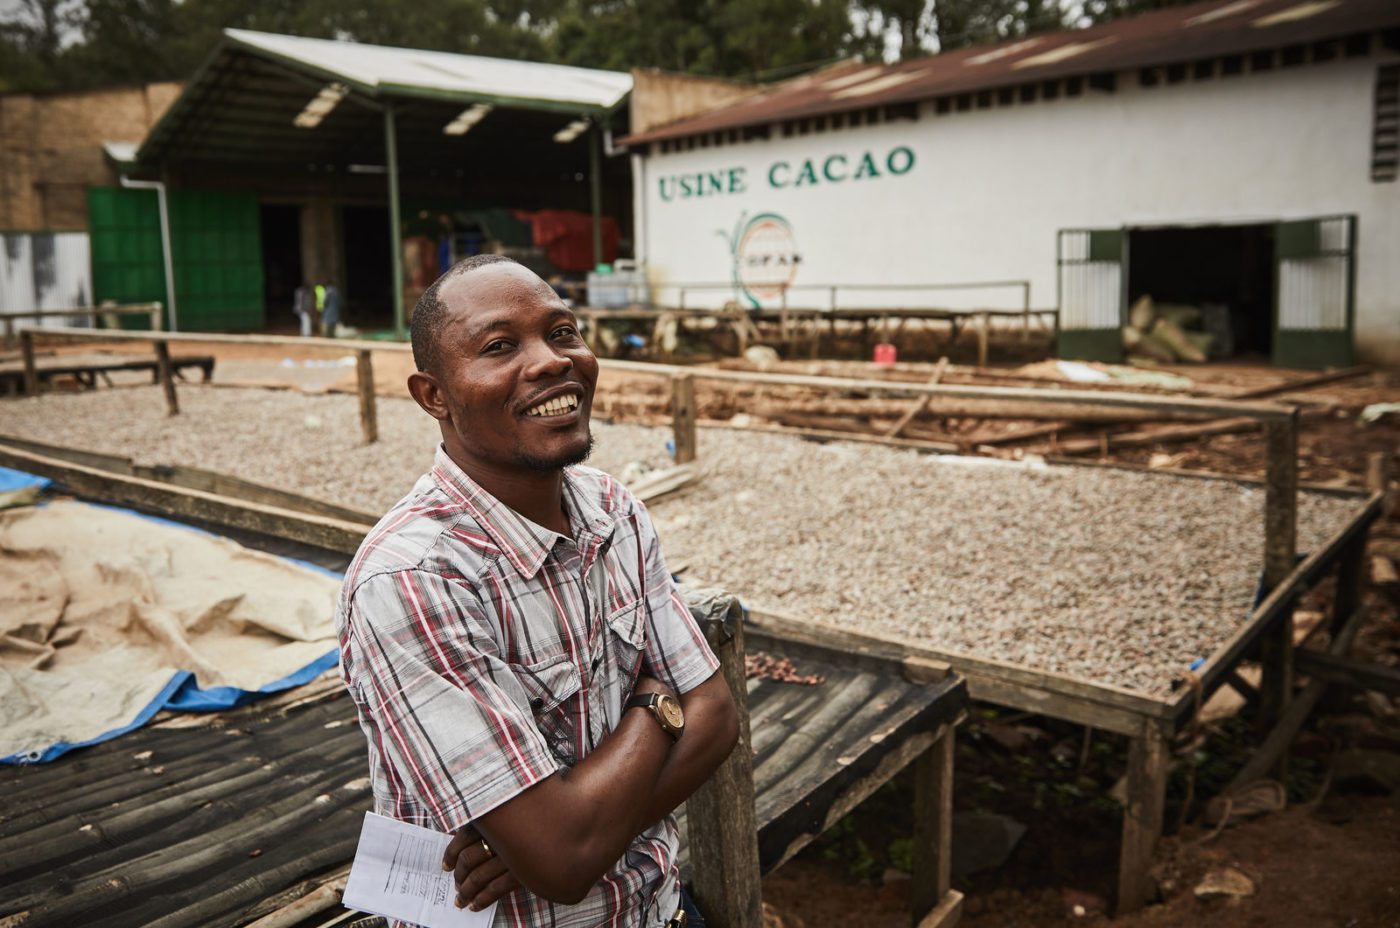 Cocoa beans being sundried at Copak